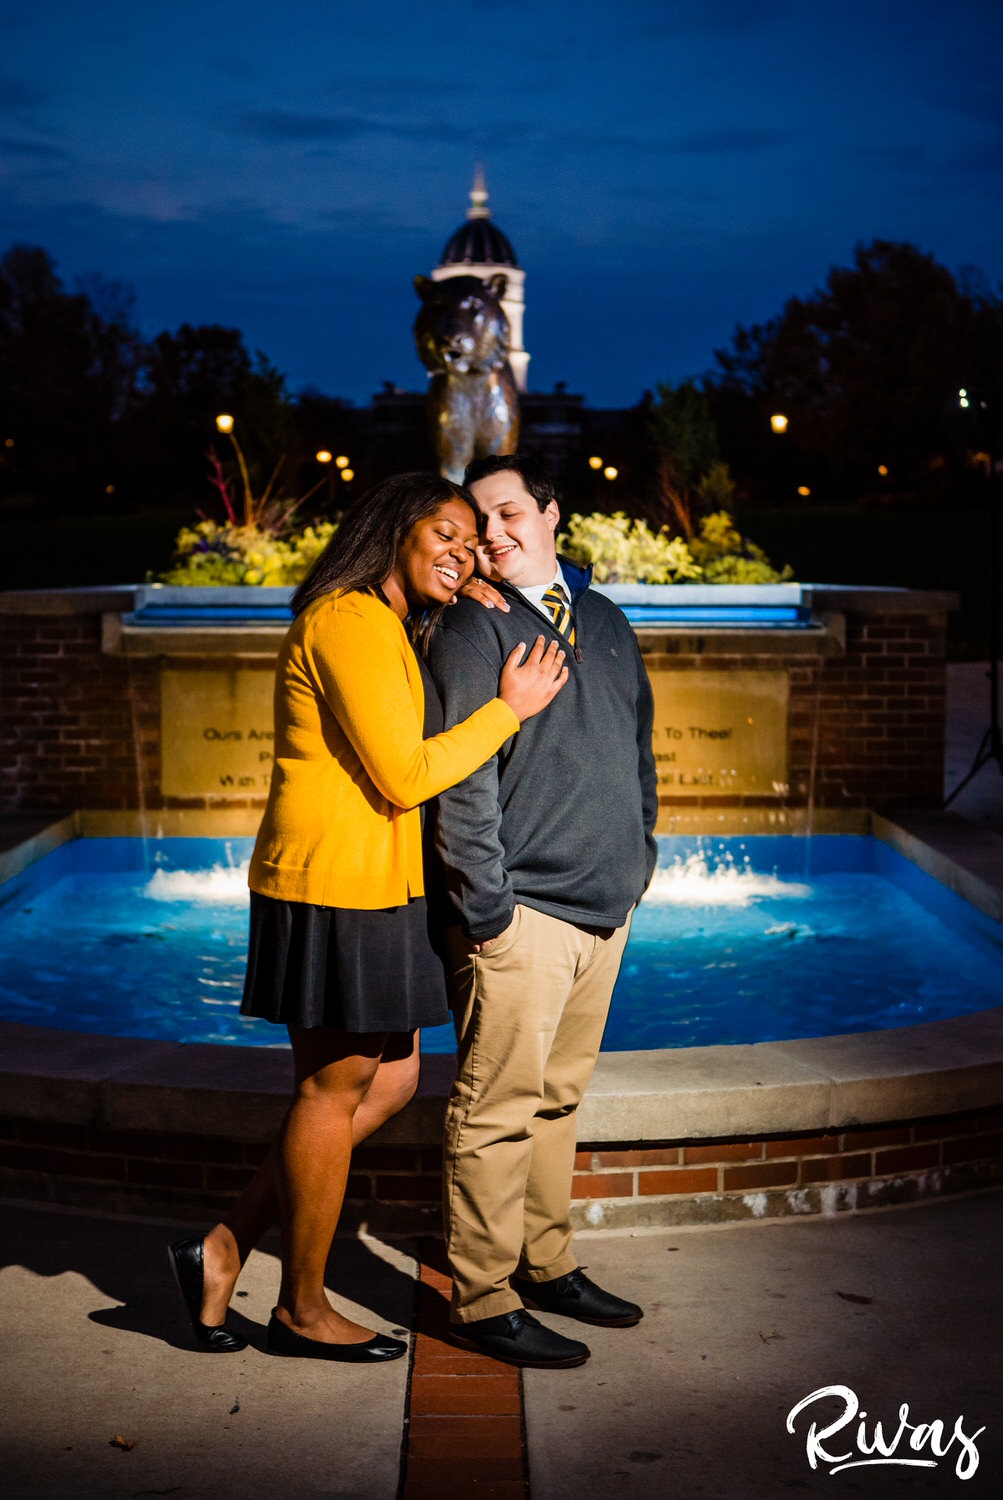 Fall MU Engagement Session | A portrait of an engaged couple sharing an embrace as they stand in front of a bronze sculpture of a tiger on MU's campus during their engagement session.